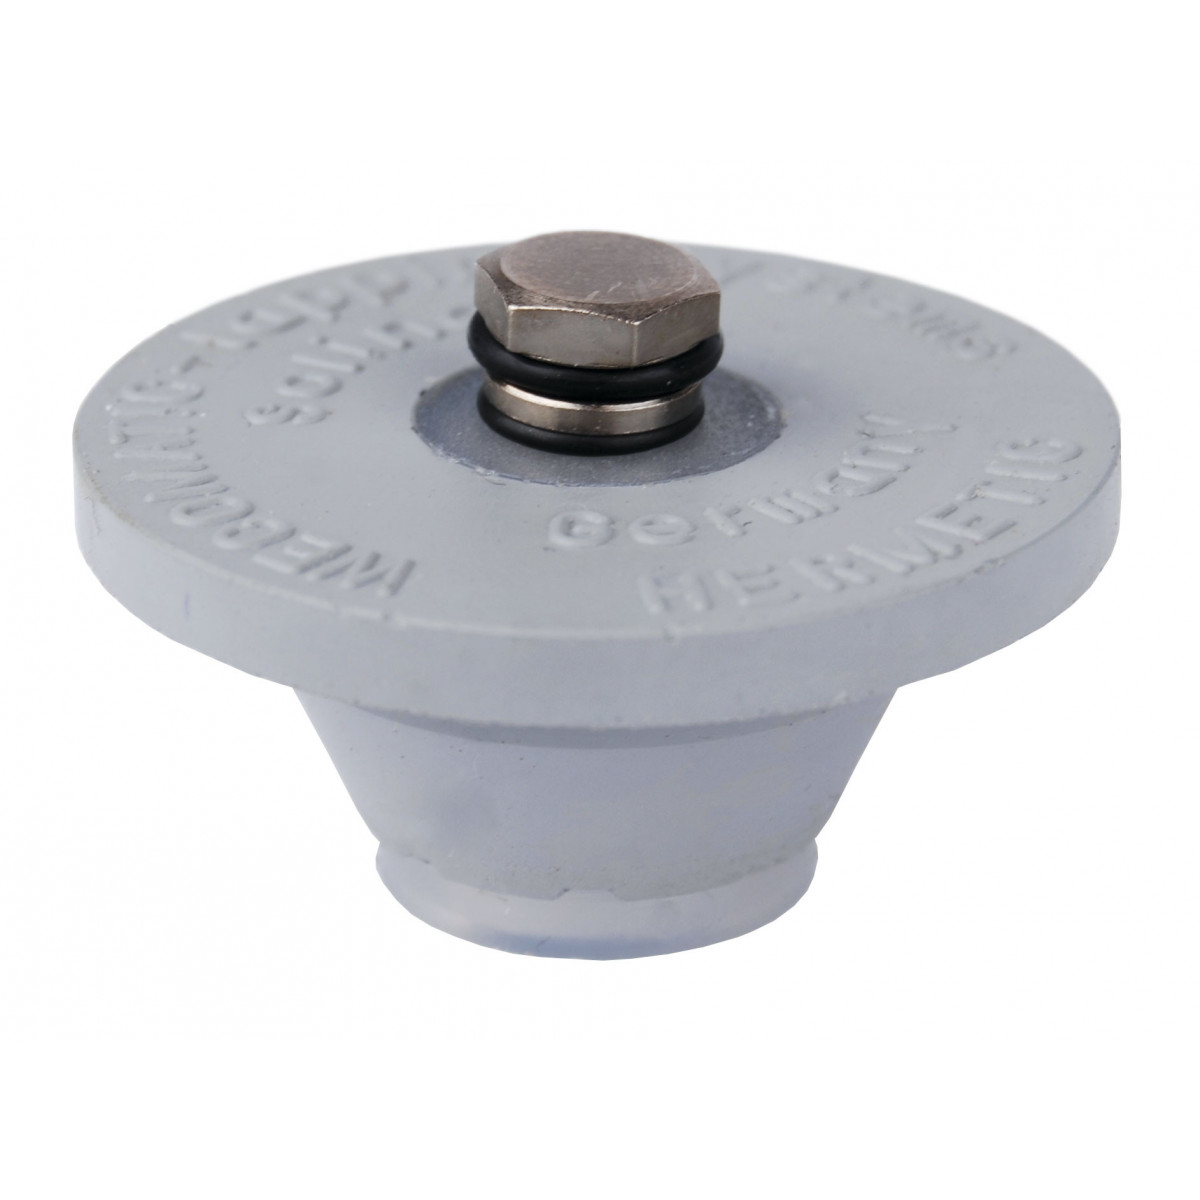 rubber plug with pressure relief for minikeg 5 l